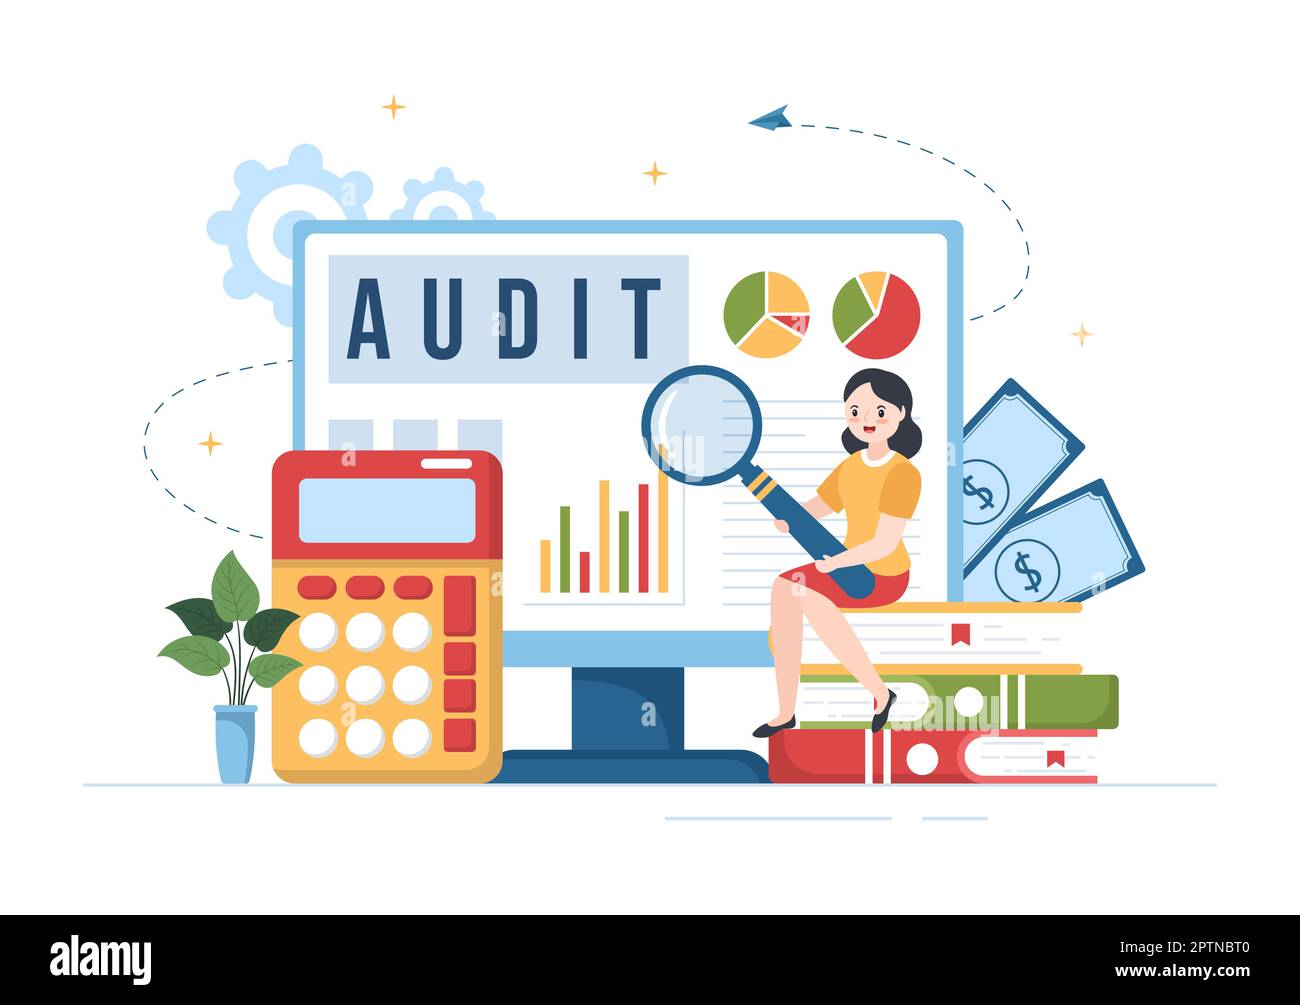 Business Audit of Documents with Charts, Accounting, Calculations and Financial Report Analytics in Flat Cartoon Hand Drawn Templates Illustration Stock Photo